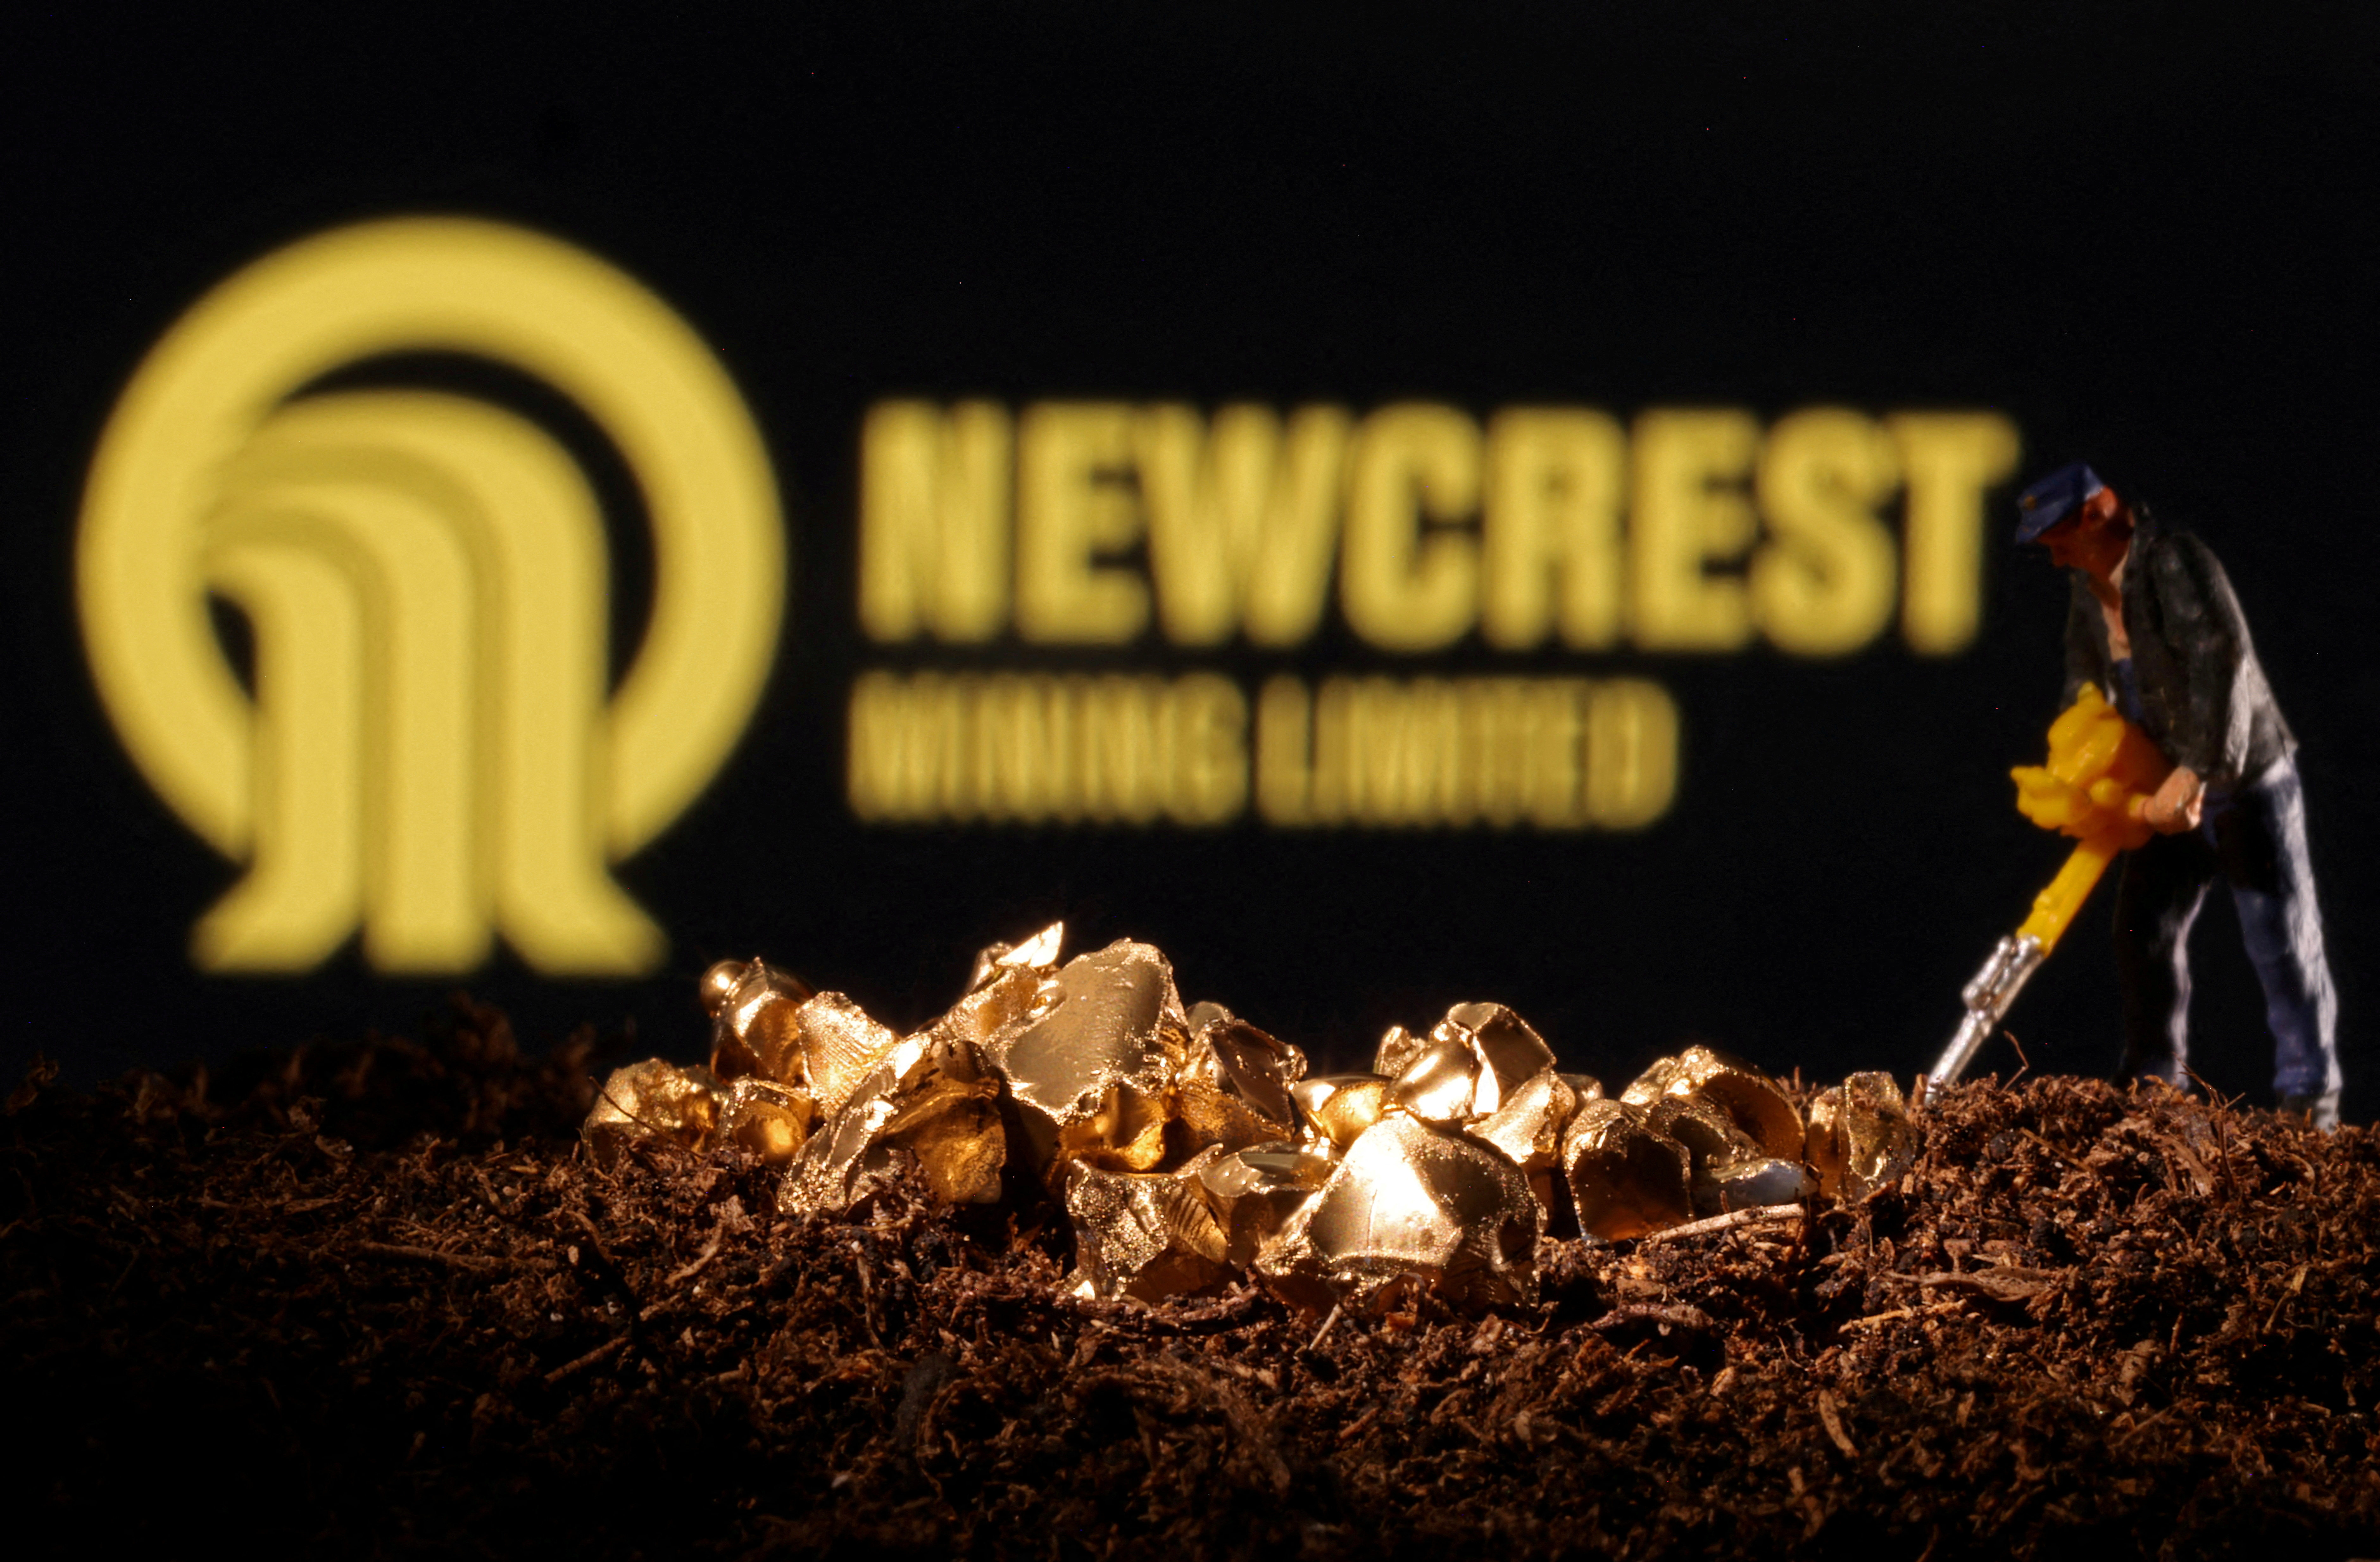 Small toy figure and imitation gold are seen in front of the Newcrest logo in this illustration